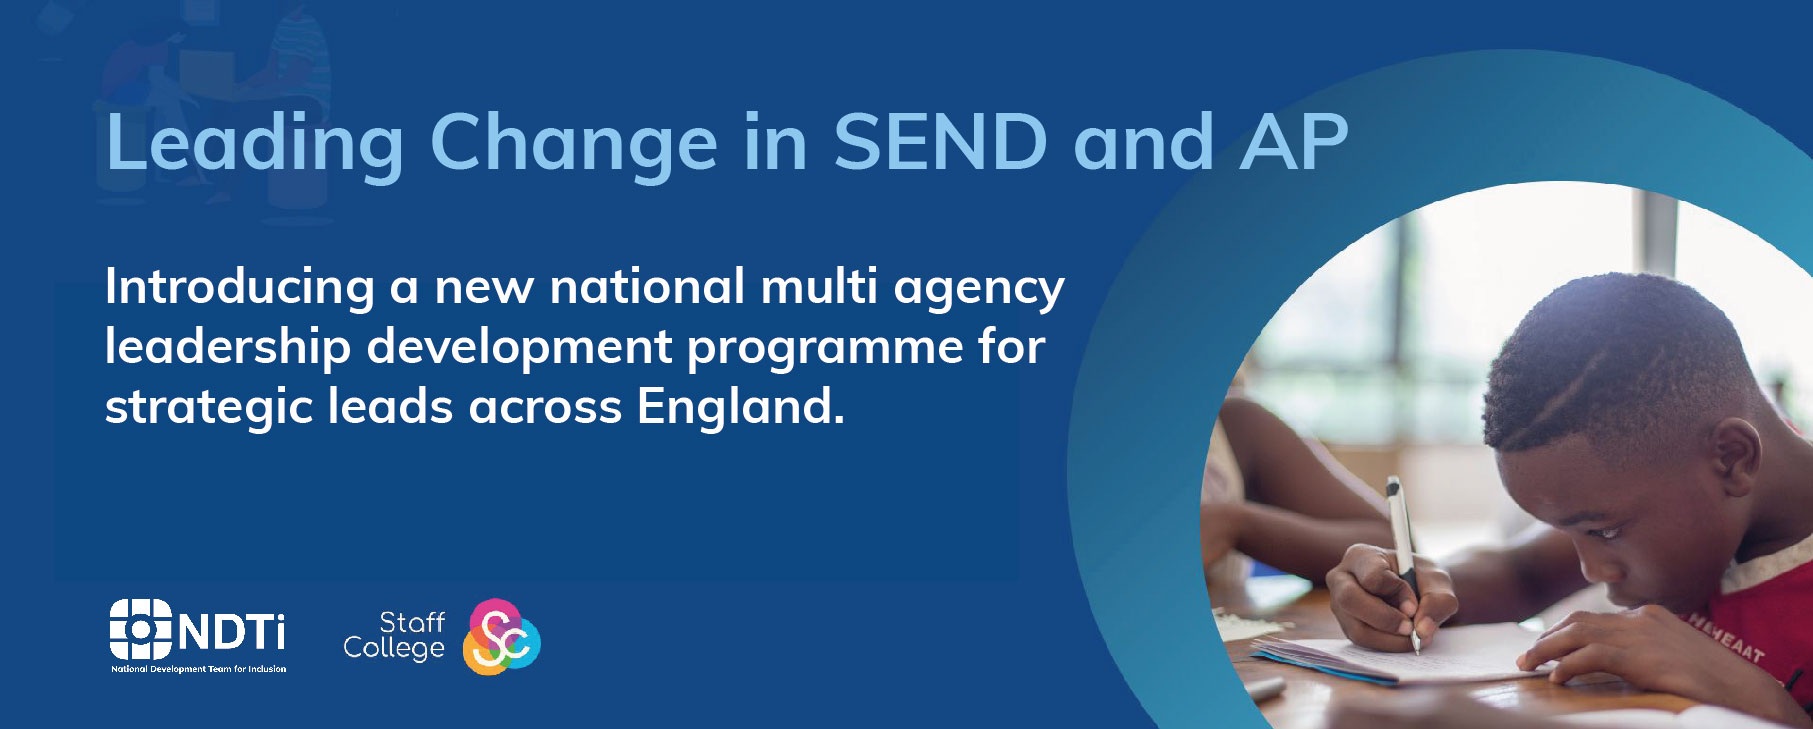 Leading change in SEND and AP